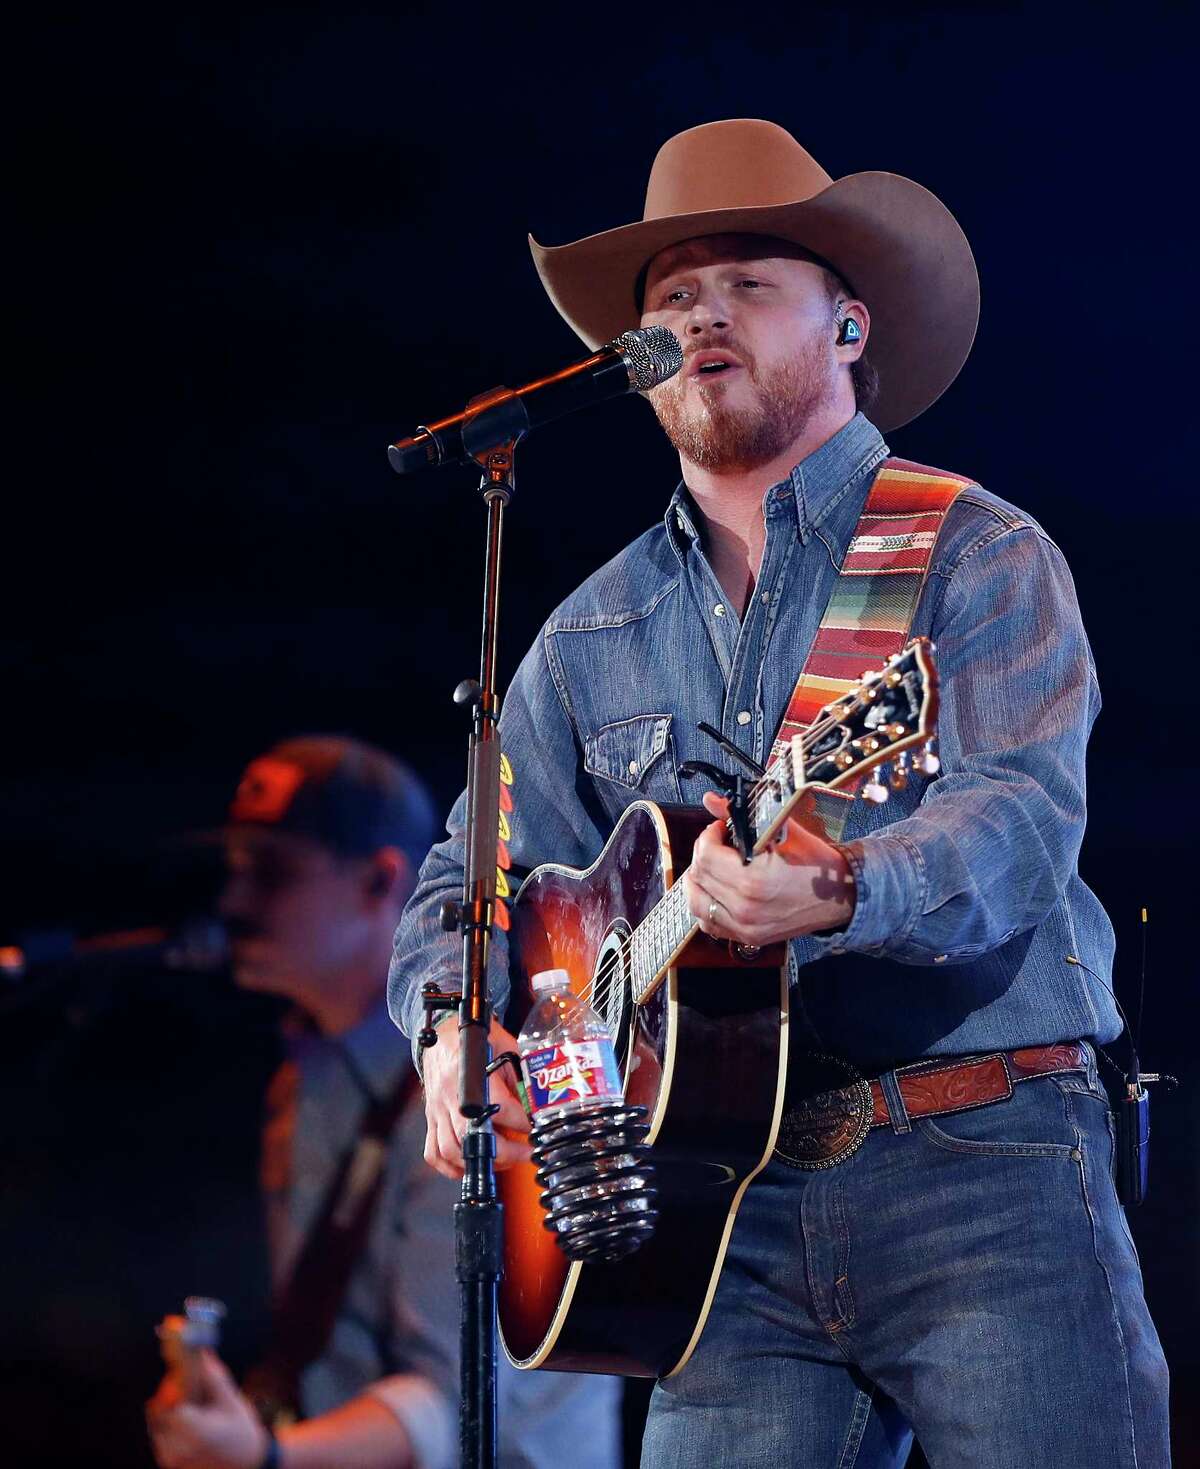 It's going to be tough to top Cody Johnson's RodeoHouston high